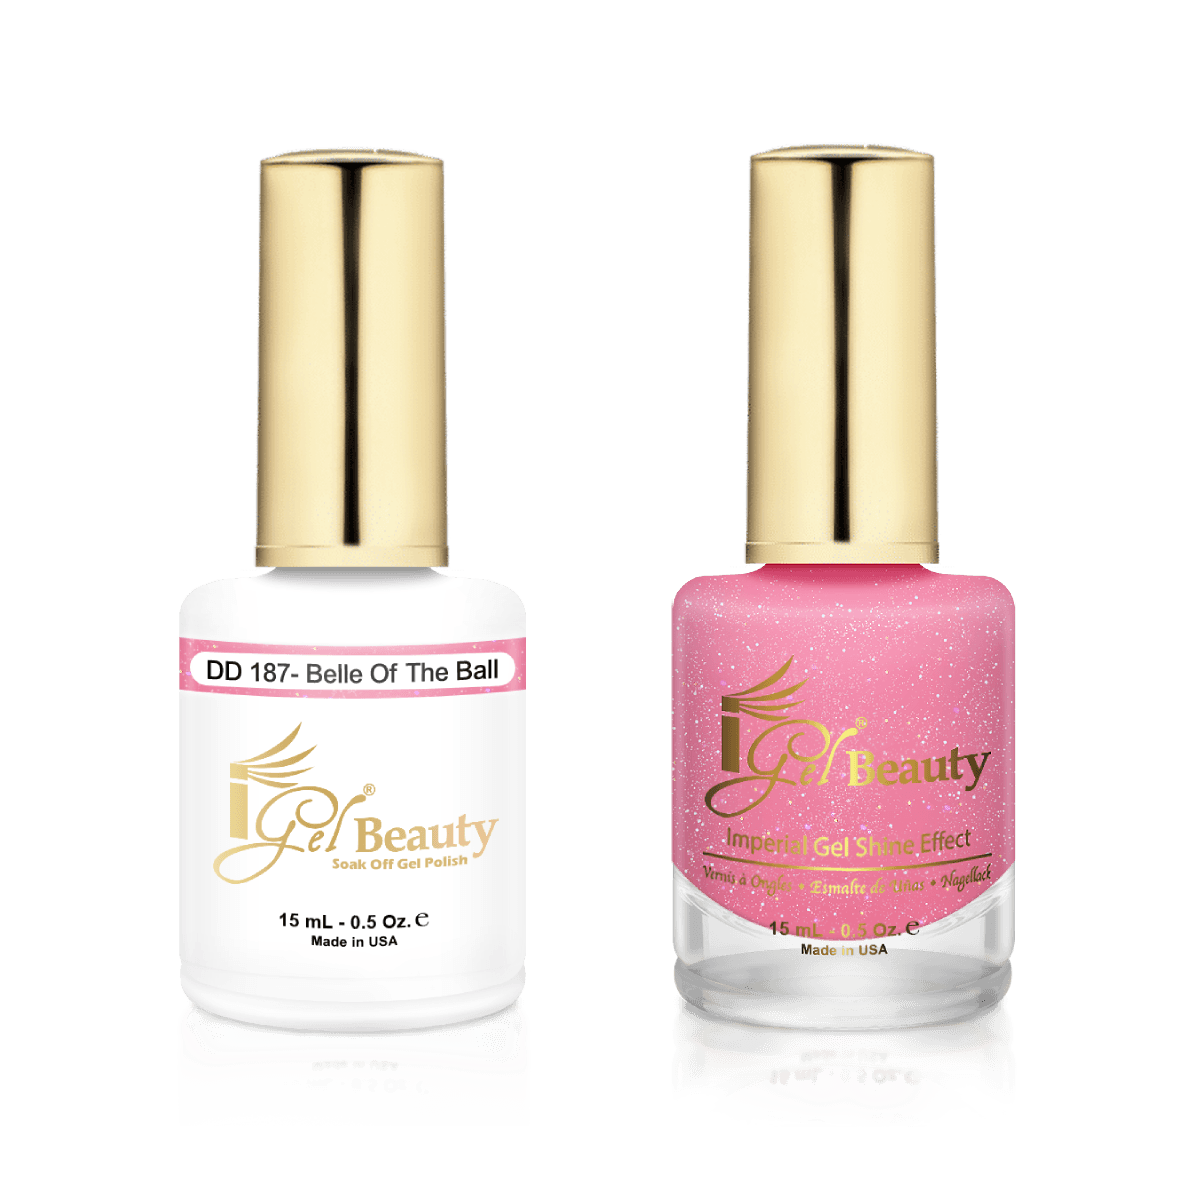 IGel Duo Gel Polish + Matching Nail Lacquer DD 187 BELLE OF THE BALL